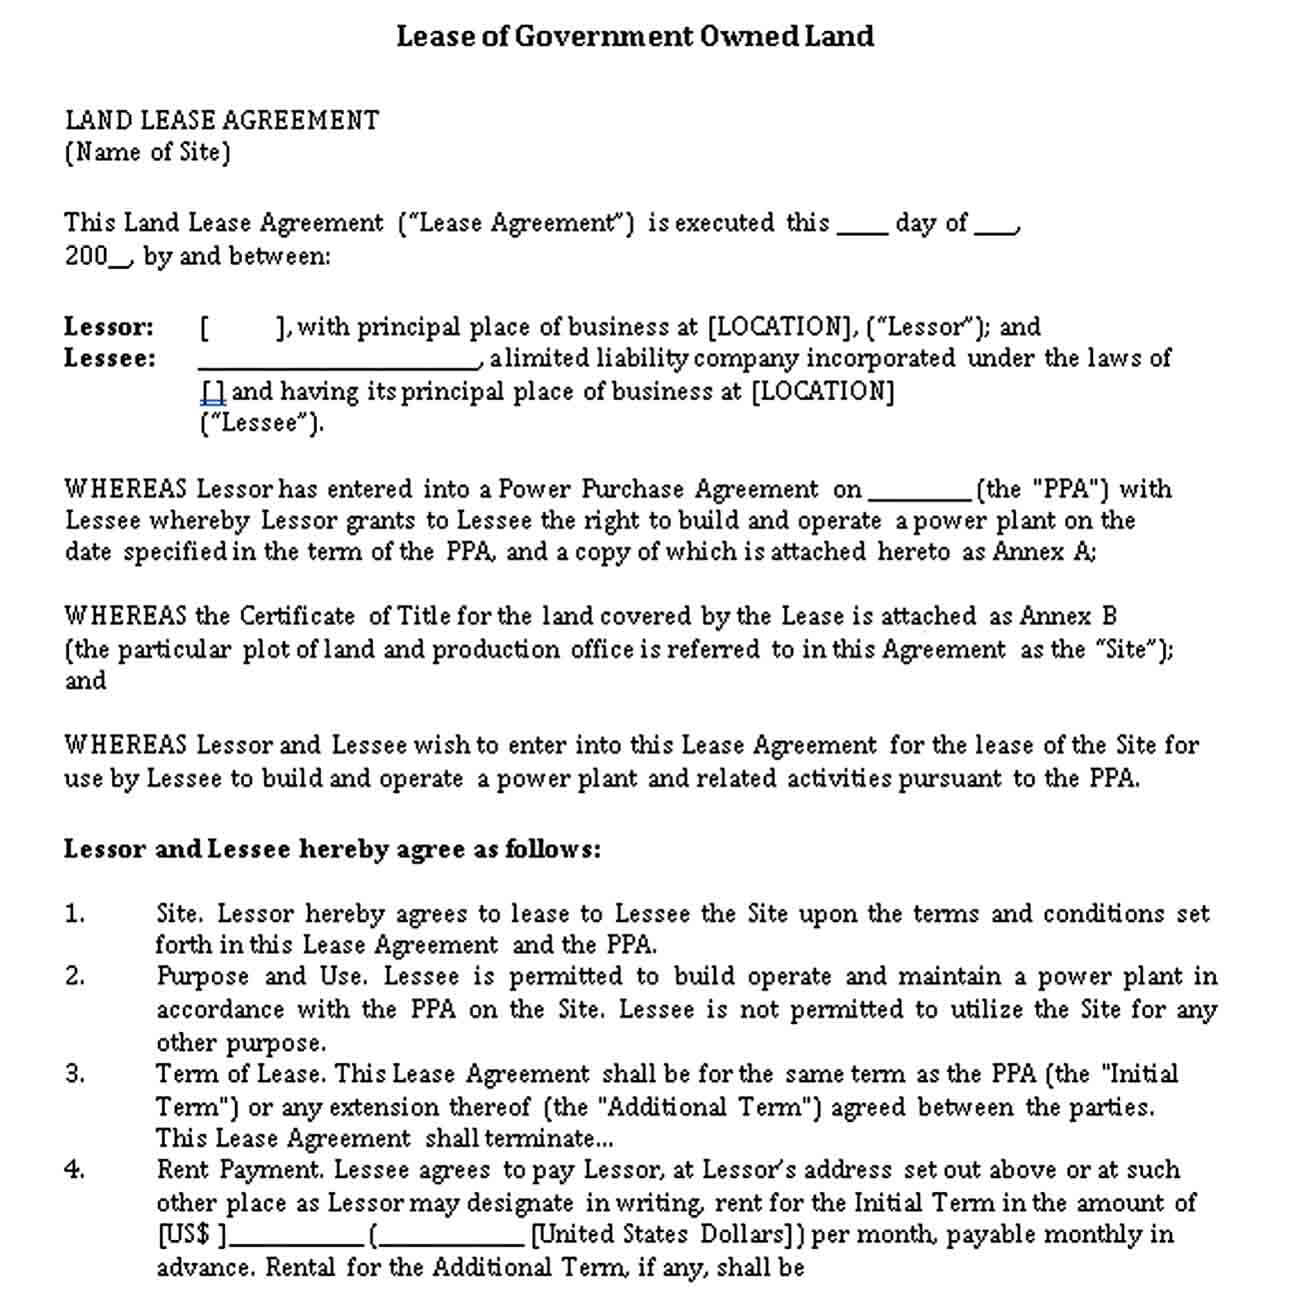 Sample Lease of Government Owned Land